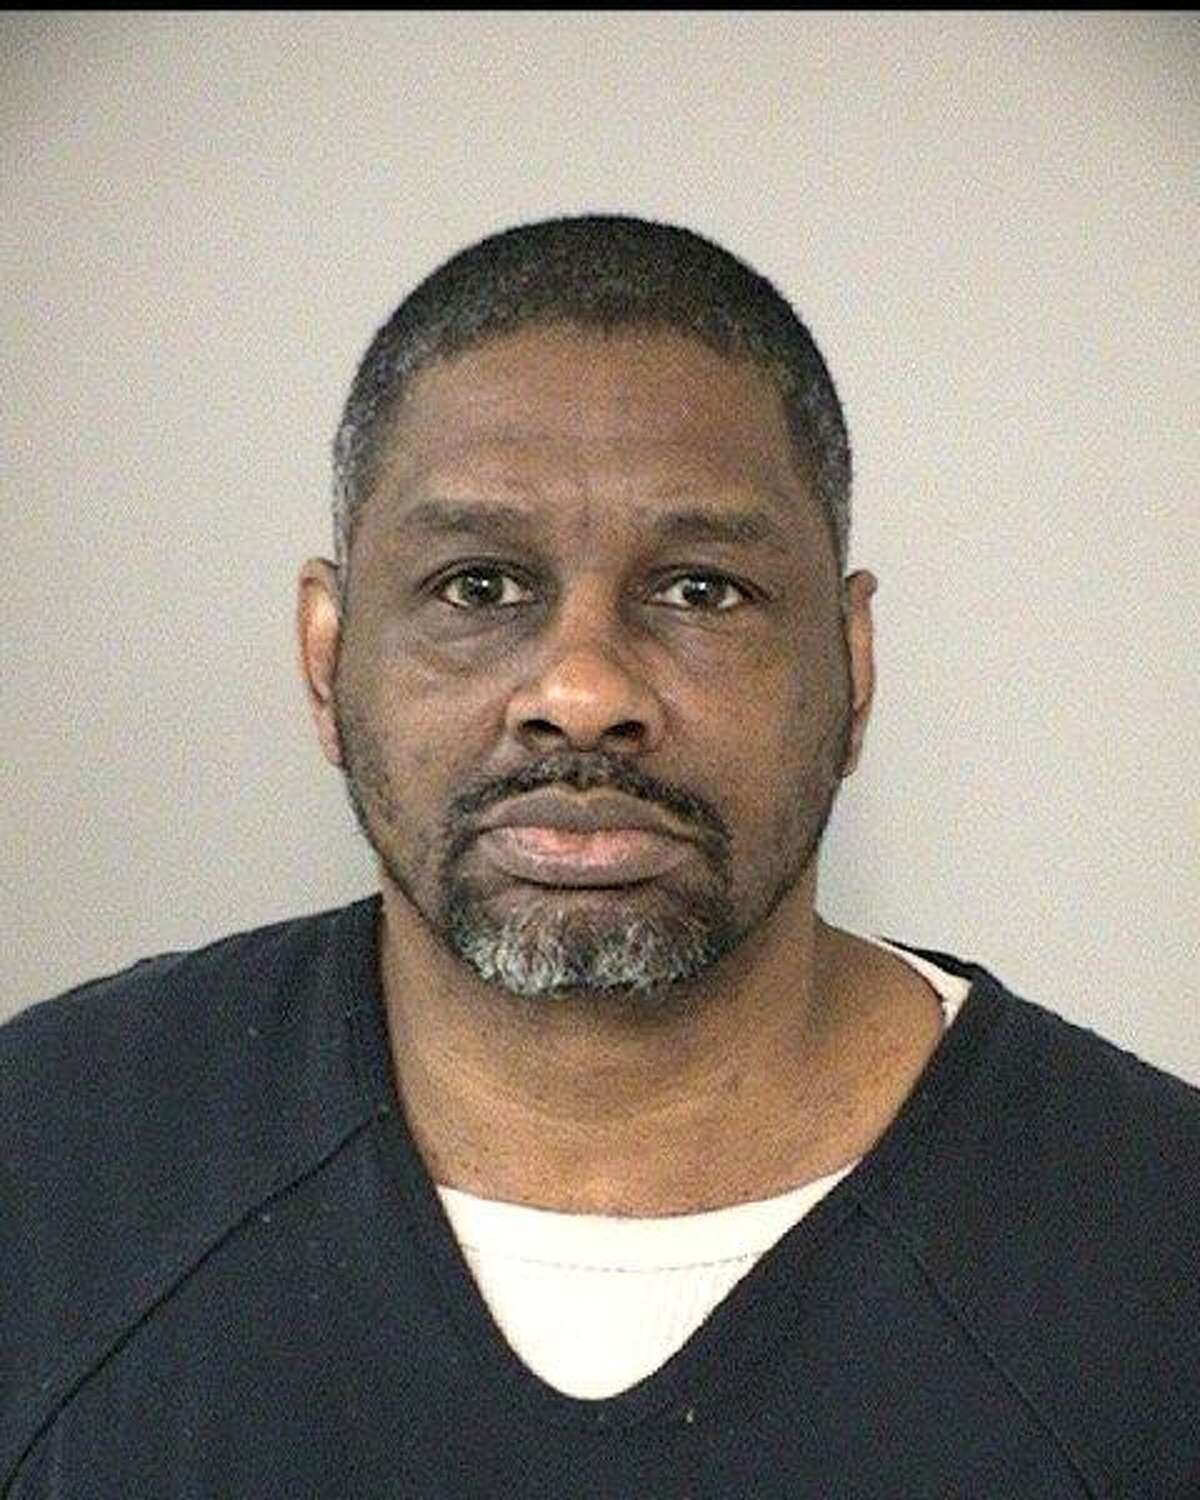 Darrell Wayne Holmes, 55, was convicted of murder by a jury of his peers on Sept. 2, 2021.